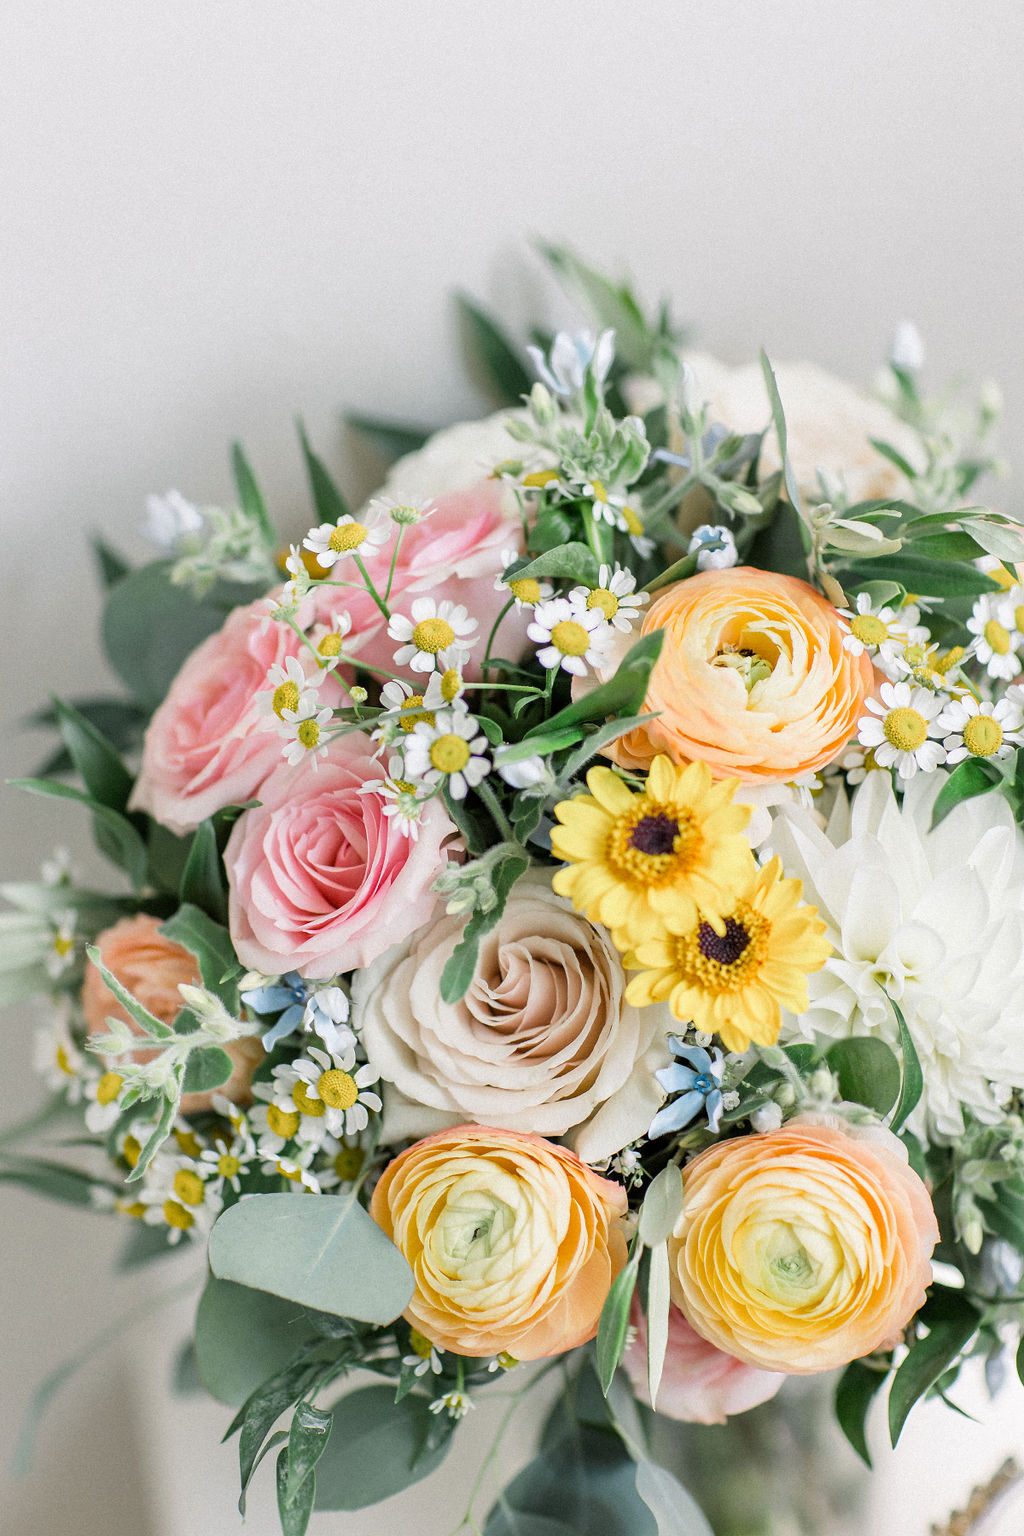 Floral Reef Designs Ottawa Wedding Florist - Amy Pinder Photography - Stonefields Estate wedding - close up on bride's soft pastel bouquet with sunflower inspiration